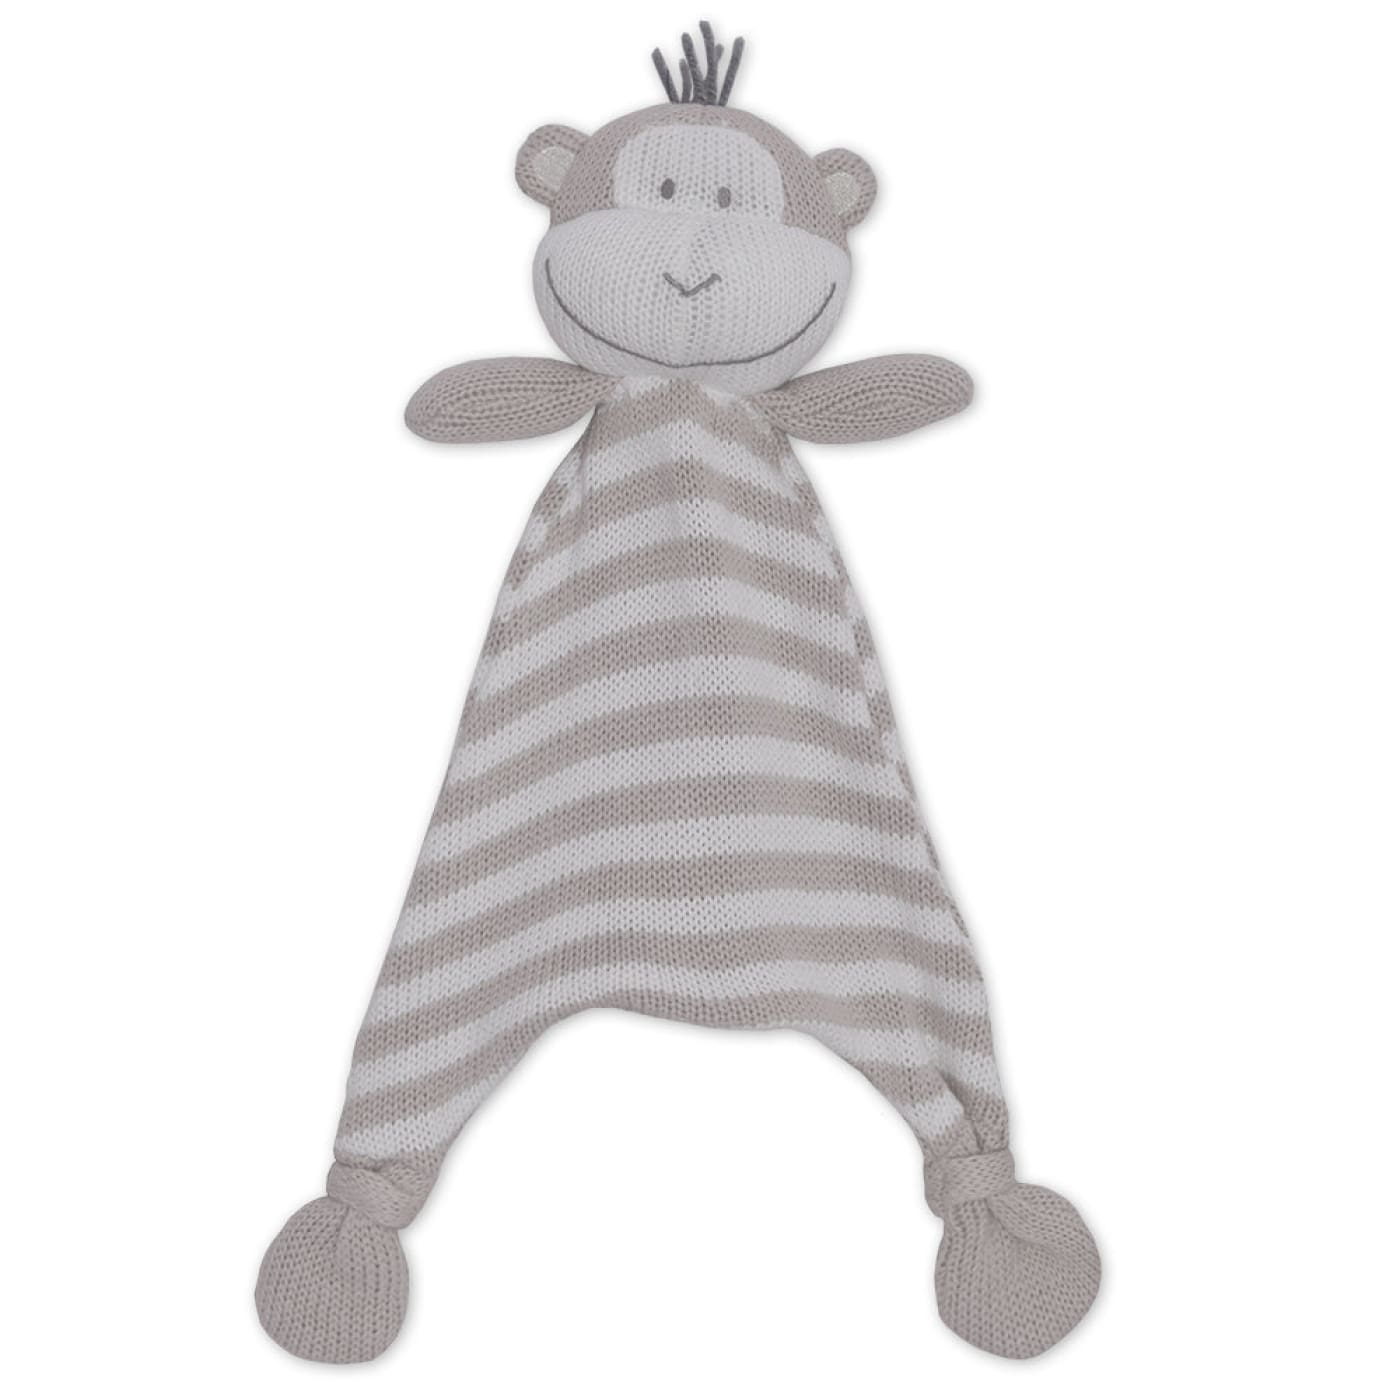 Living Textiles Knit Security Blanket - Max The Monkey - Monkey - TOYS & PLAY - BLANKIES/COMFORTERS/RATTLES